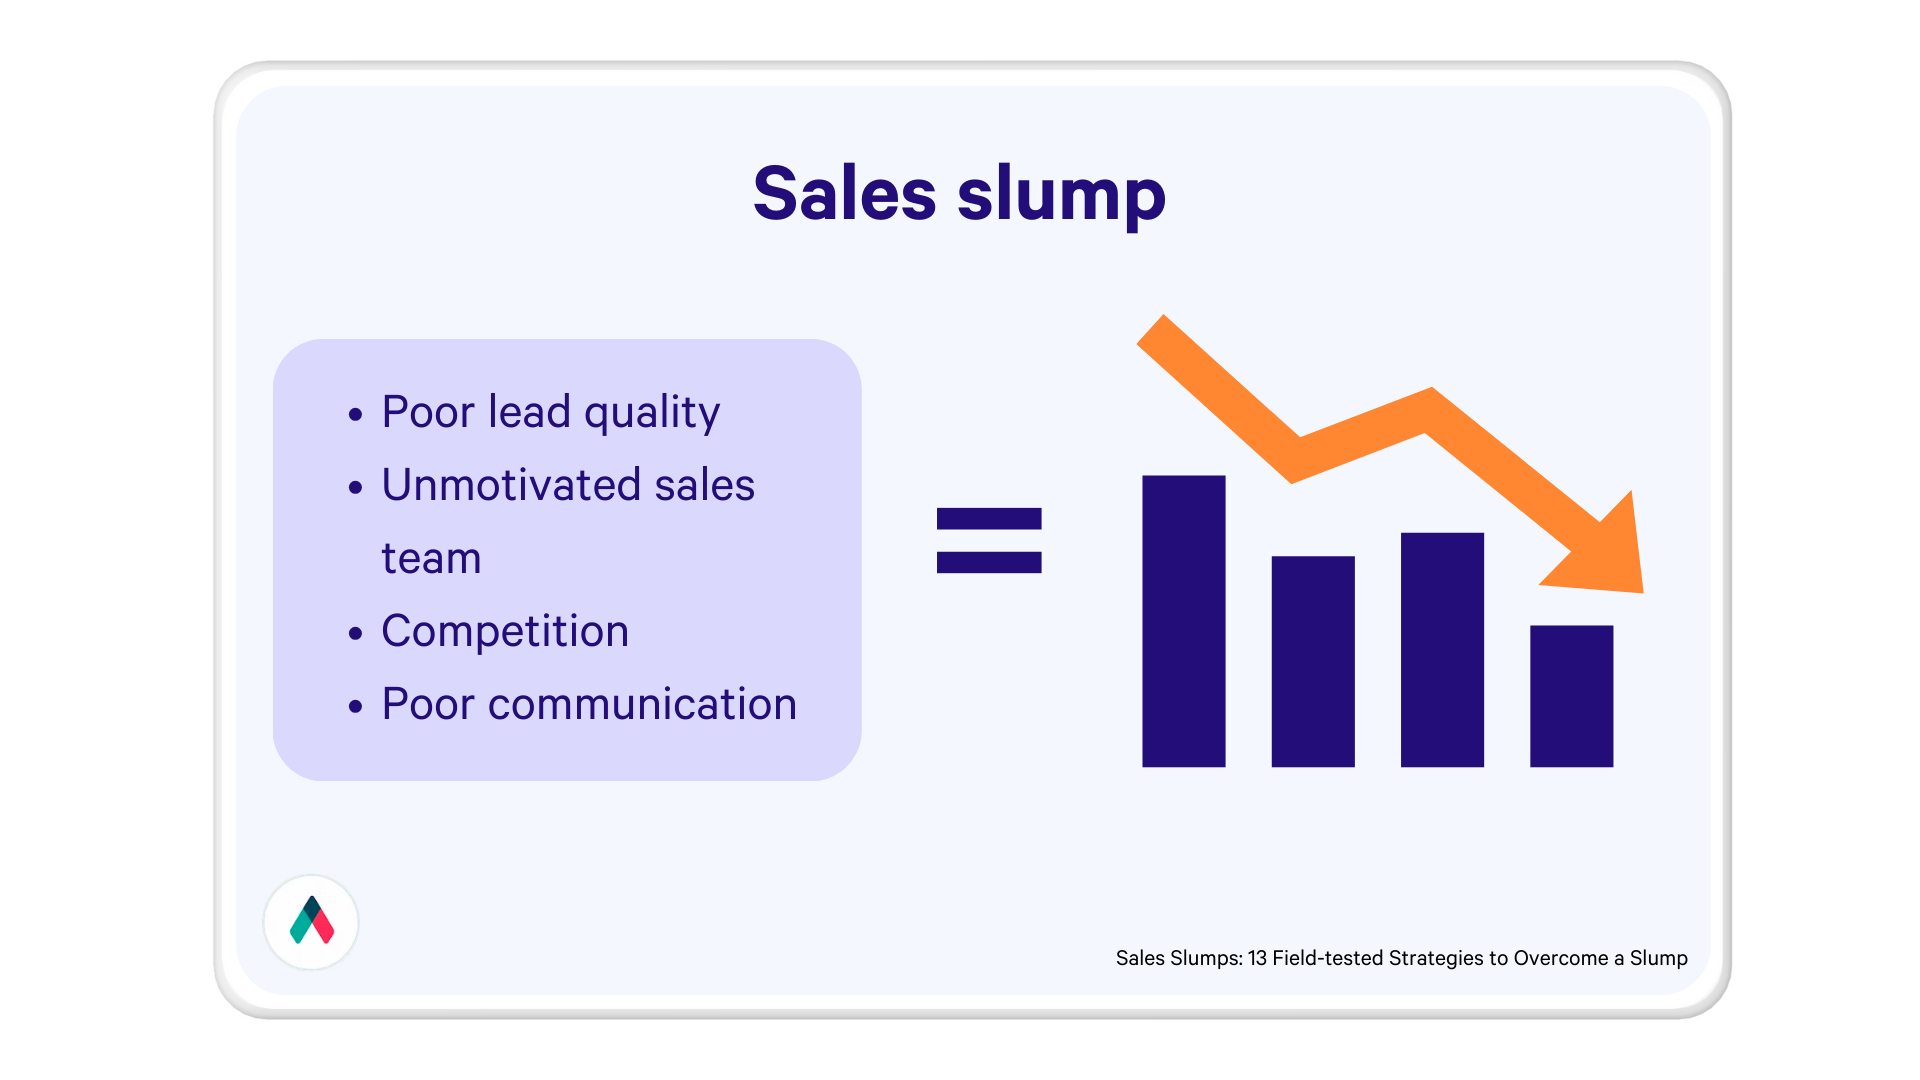 a graph showing a sales slump with poor lead quality, unmotivated sales team, competition and poor communication